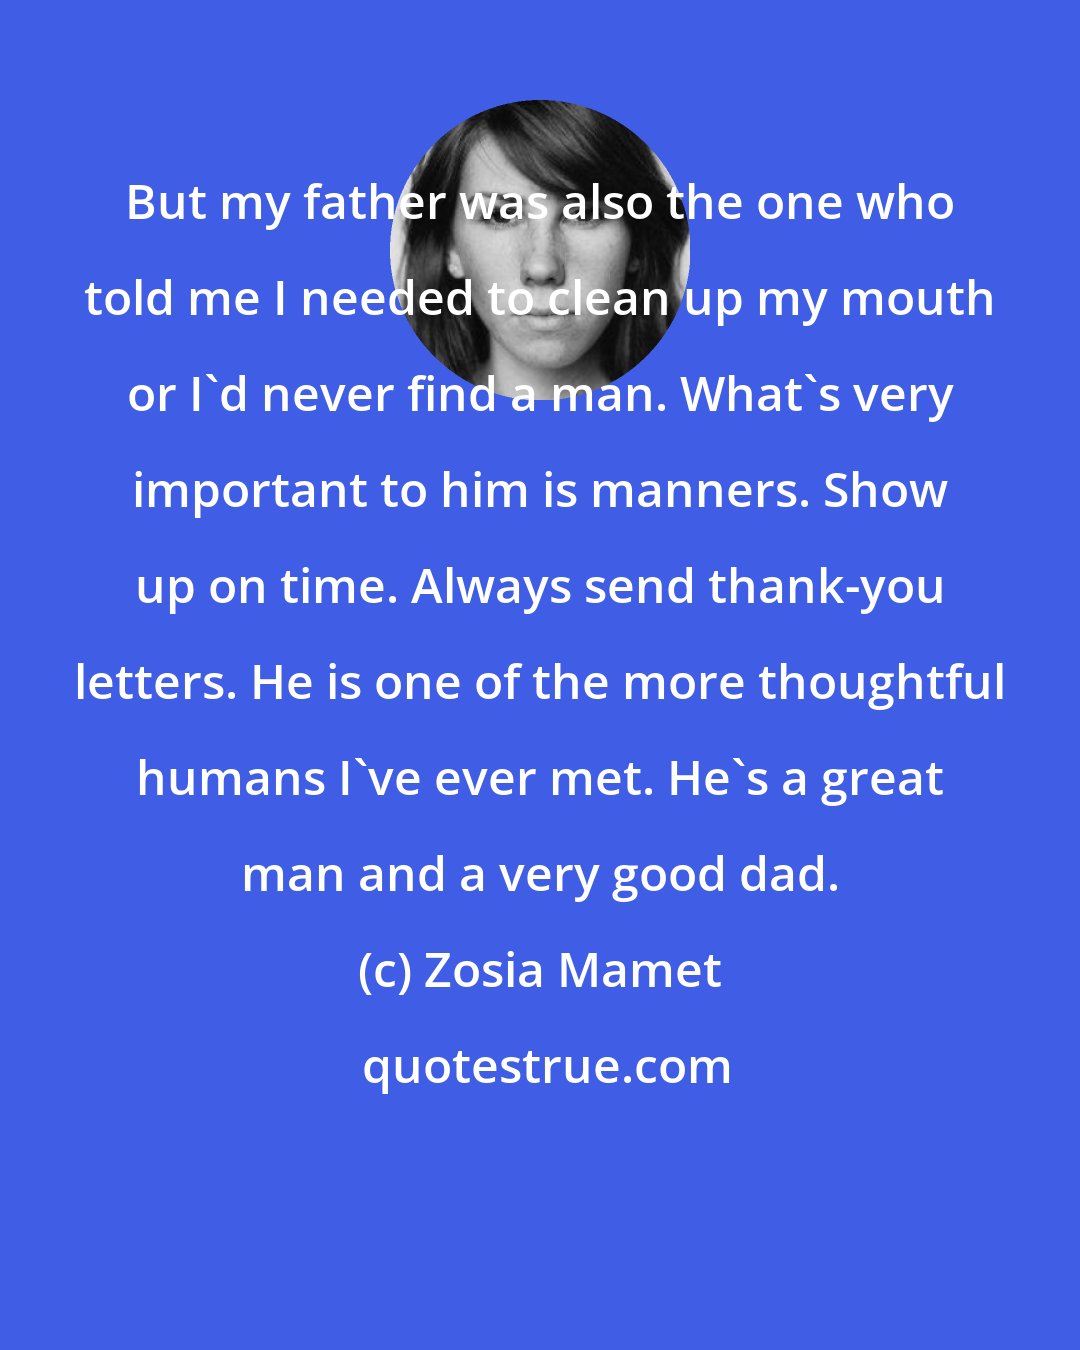 Zosia Mamet: But my father was also the one who told me I needed to clean up my mouth or I'd never find a man. What's very important to him is manners. Show up on time. Always send thank-you letters. He is one of the more thoughtful humans I've ever met. He's a great man and a very good dad.